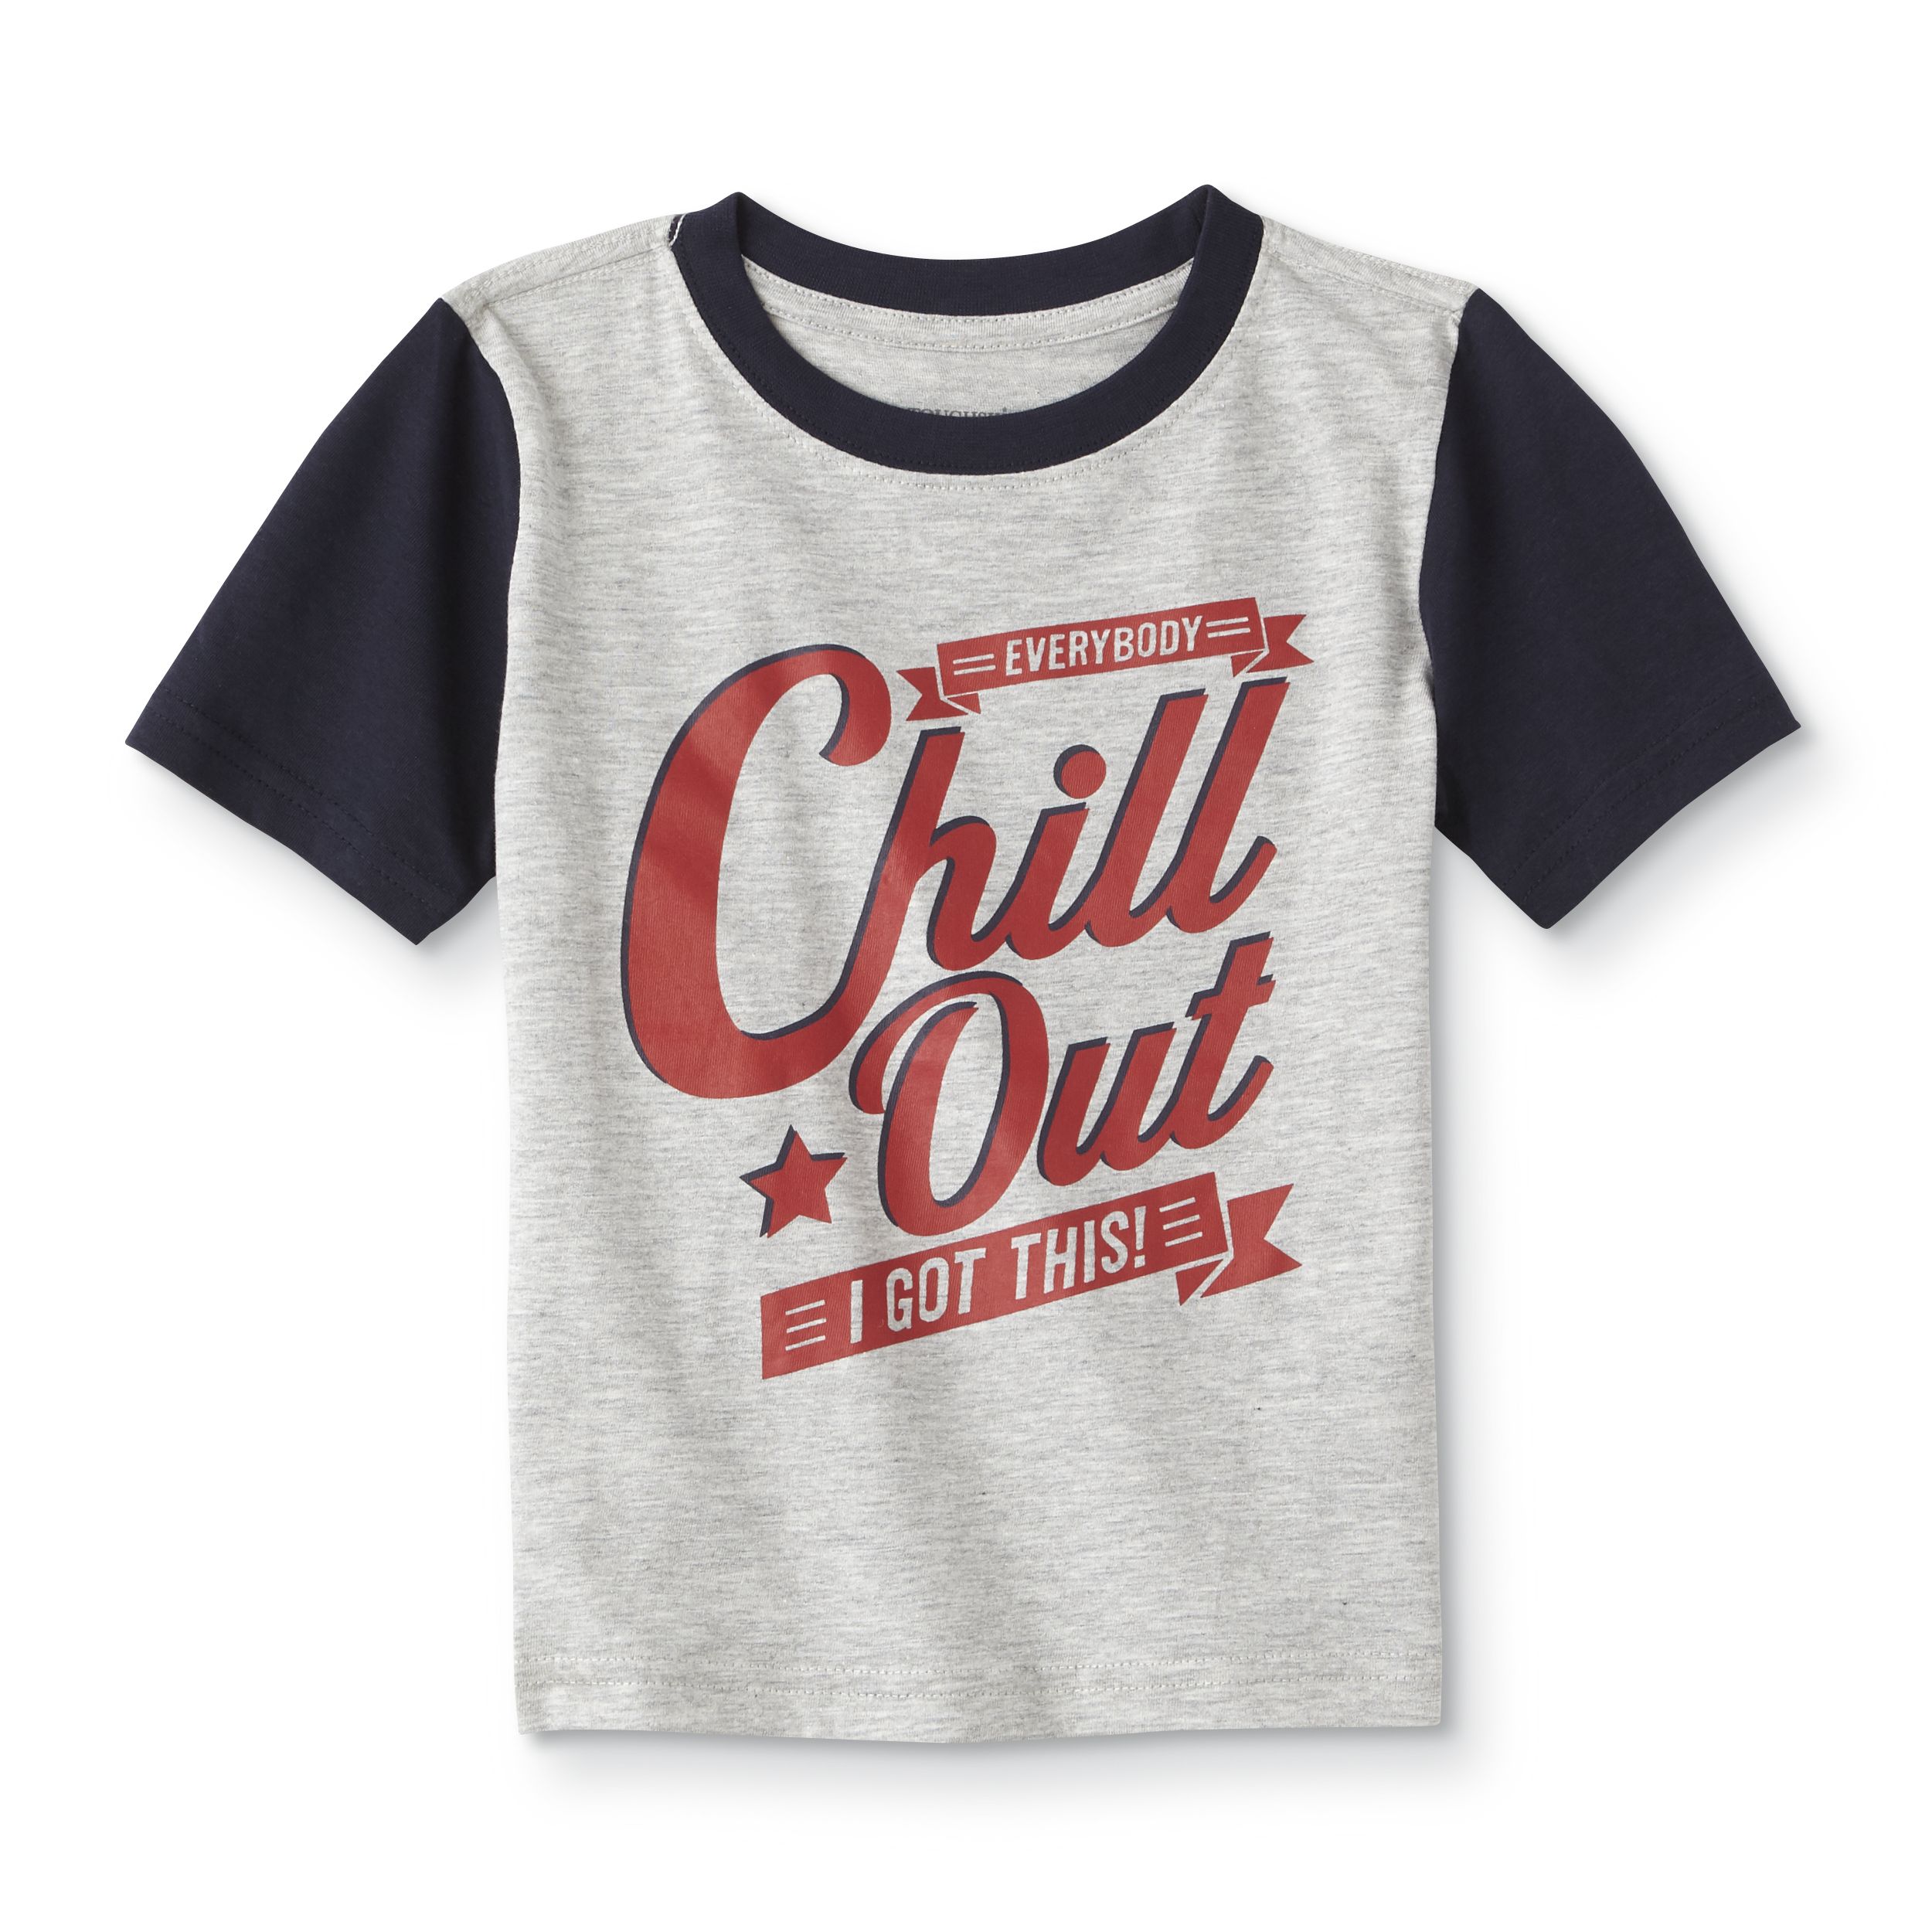 Toughskins Toddler Boys' Graphic T-Shirt - Chill Out